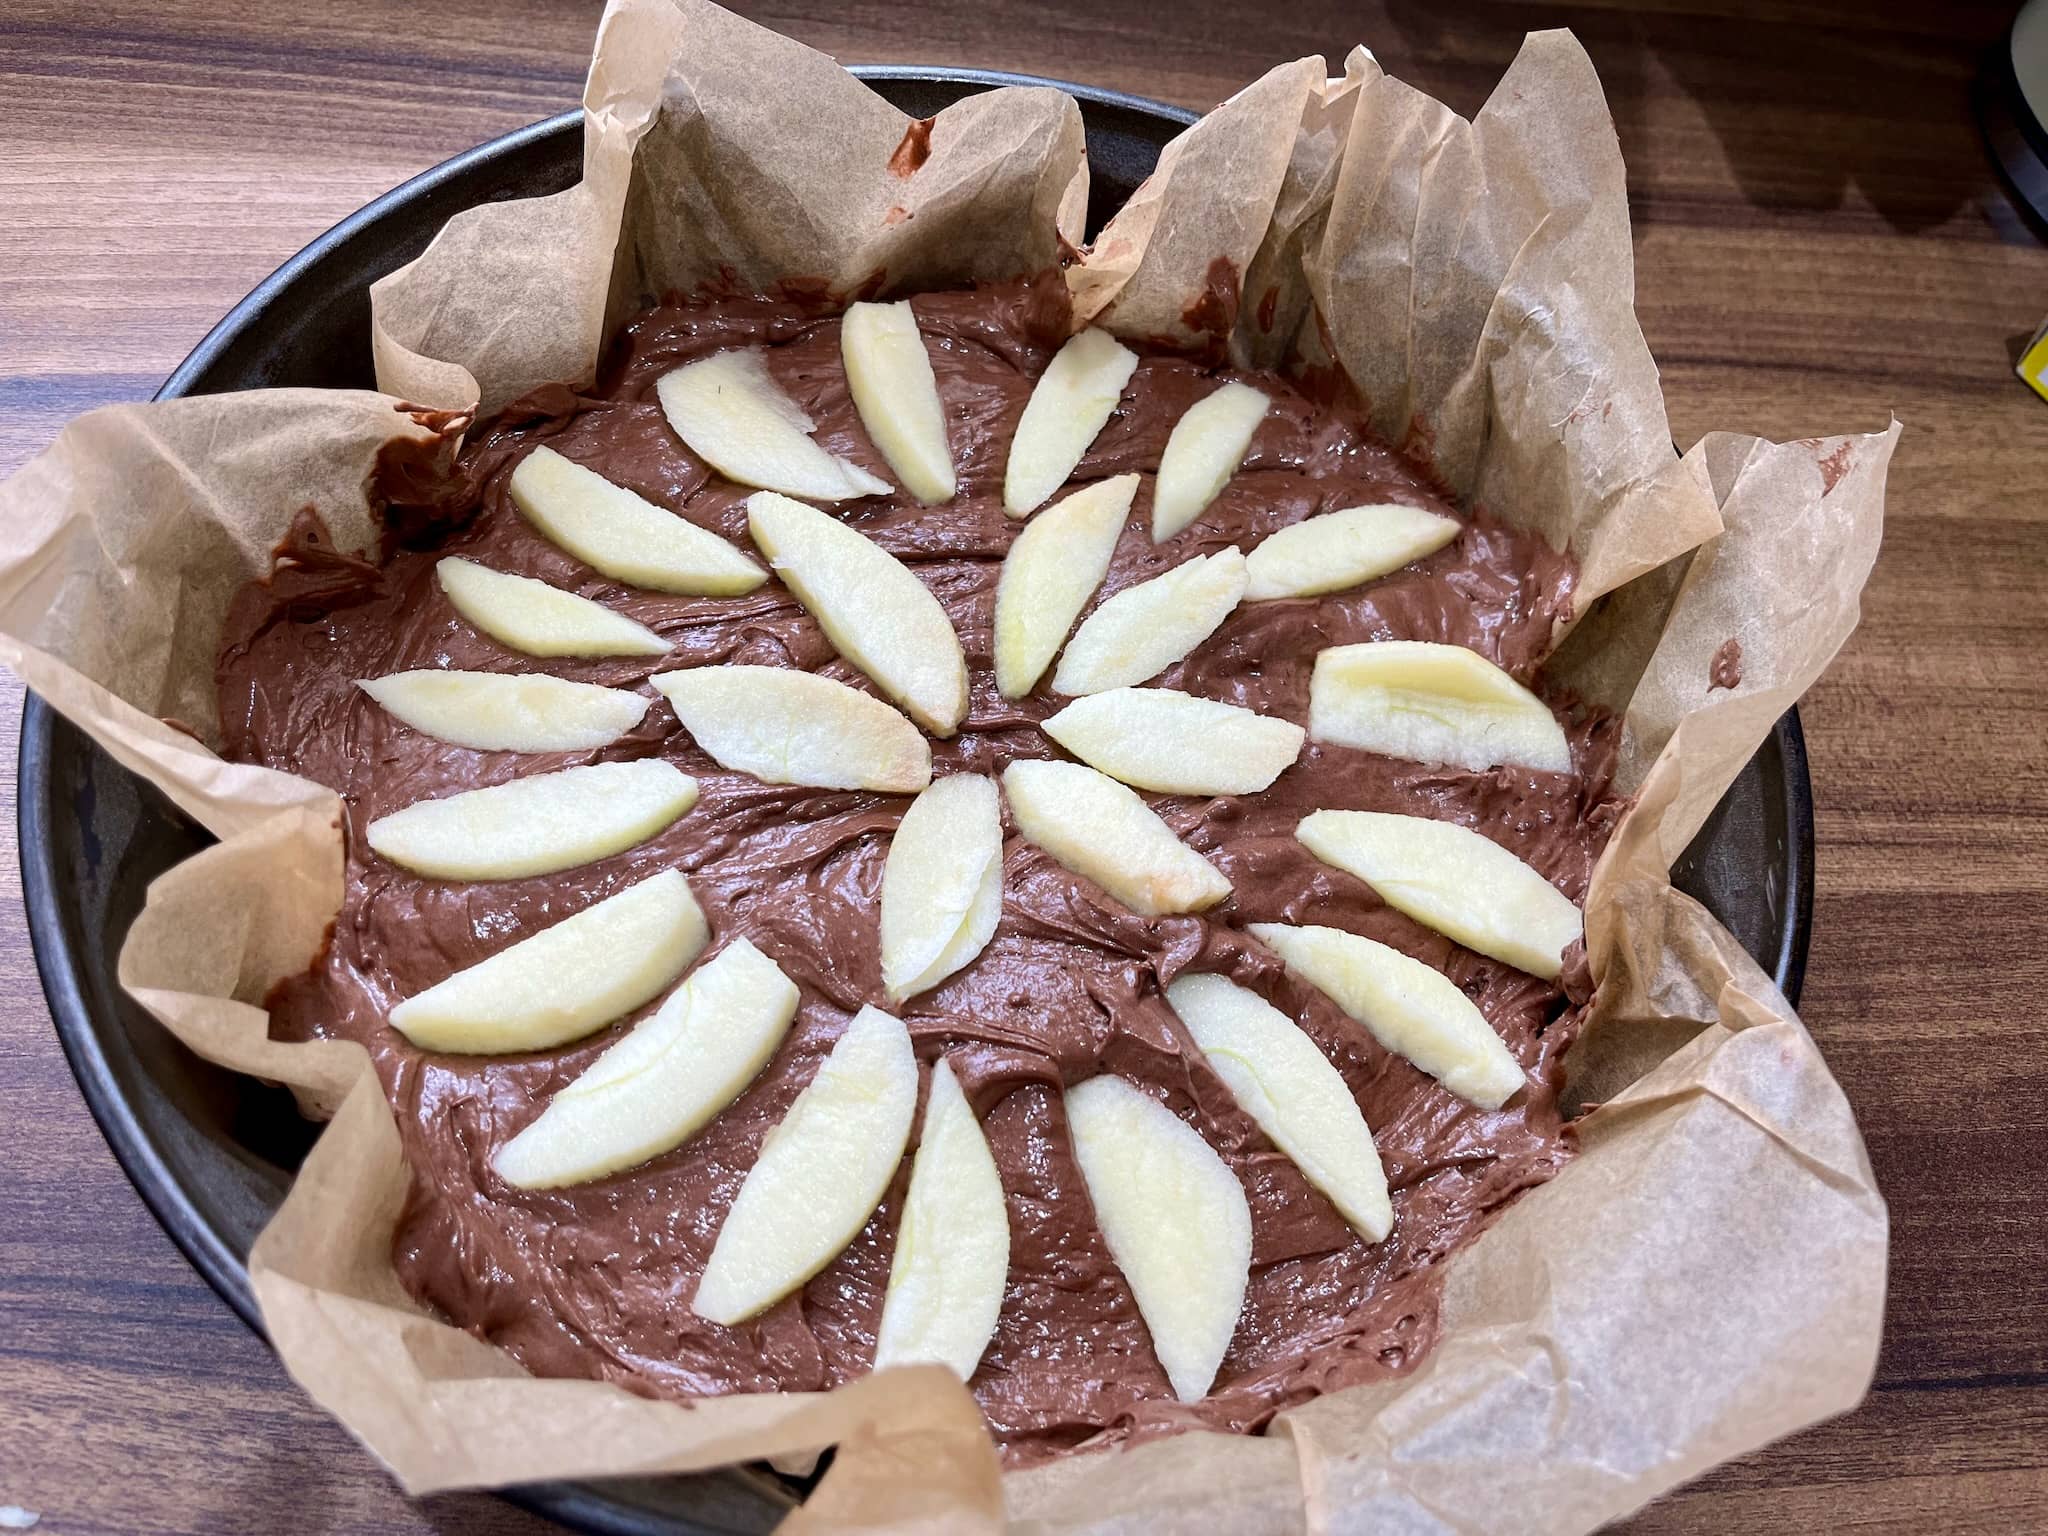 Chocolate cake mixture in a baking tray with apple slices in a pattern